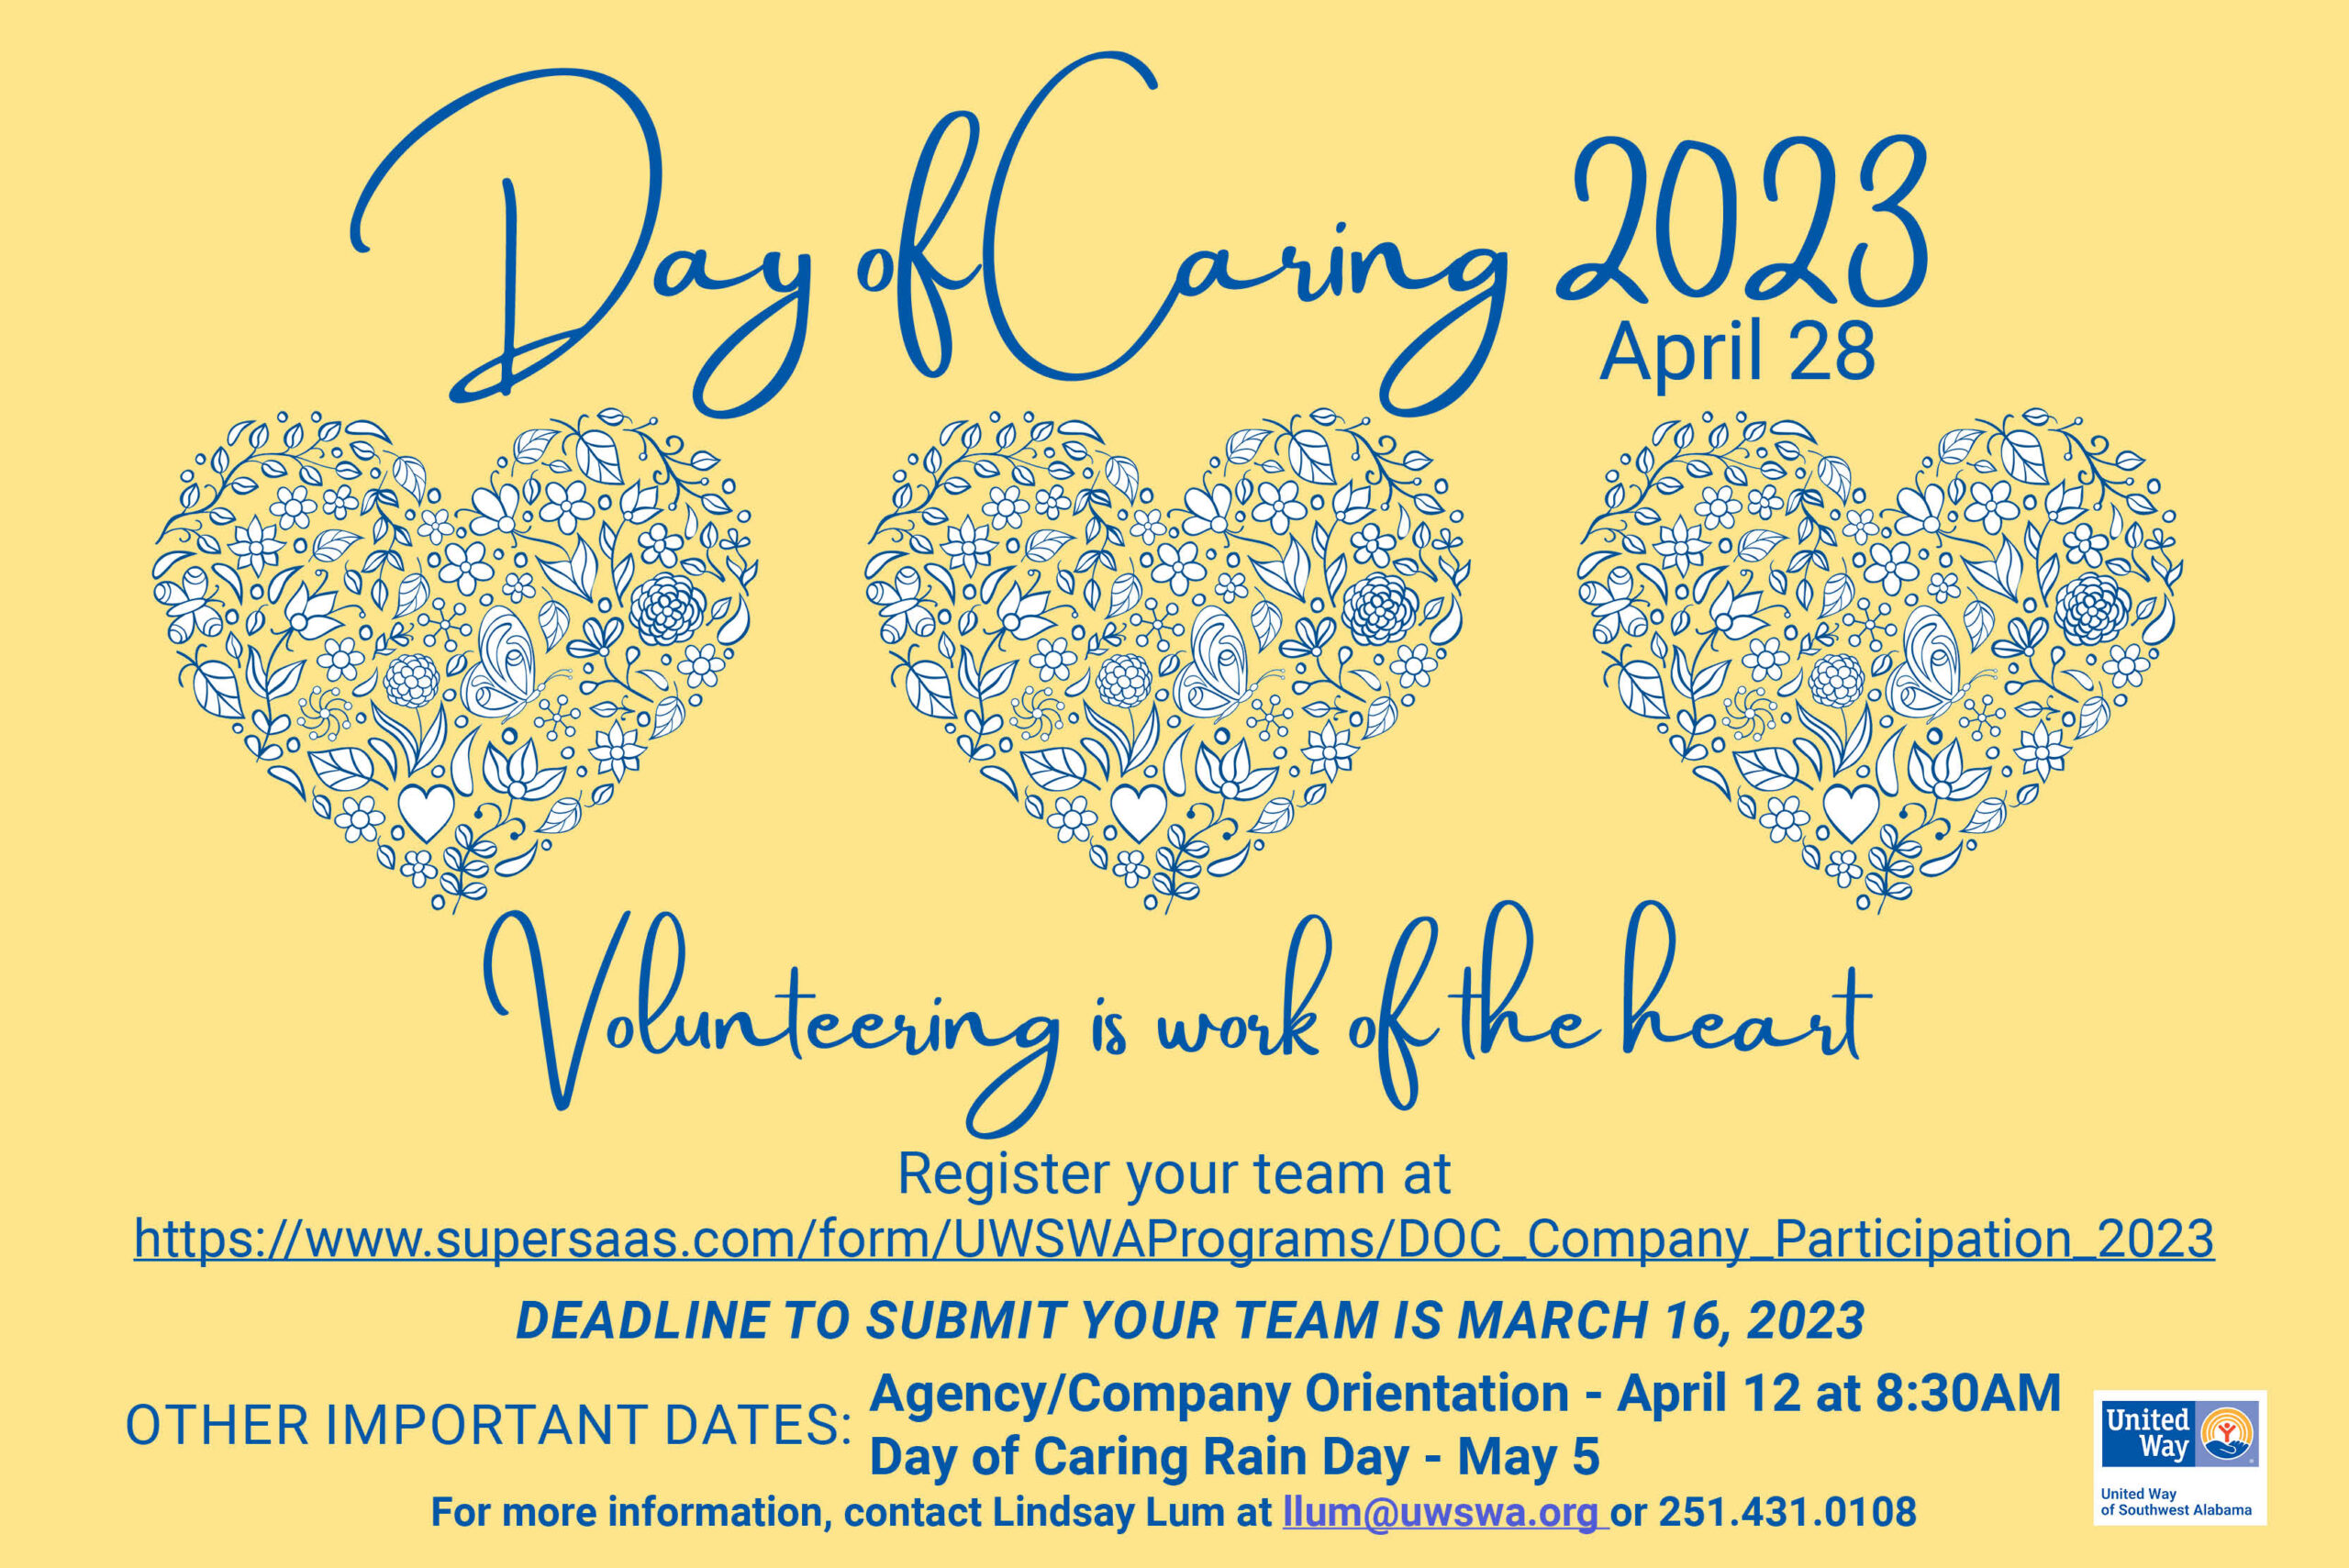 Day of Caring 2023. Volunteering is work of the heart. Register your team at the link provided. Deadline to submit is March 16.